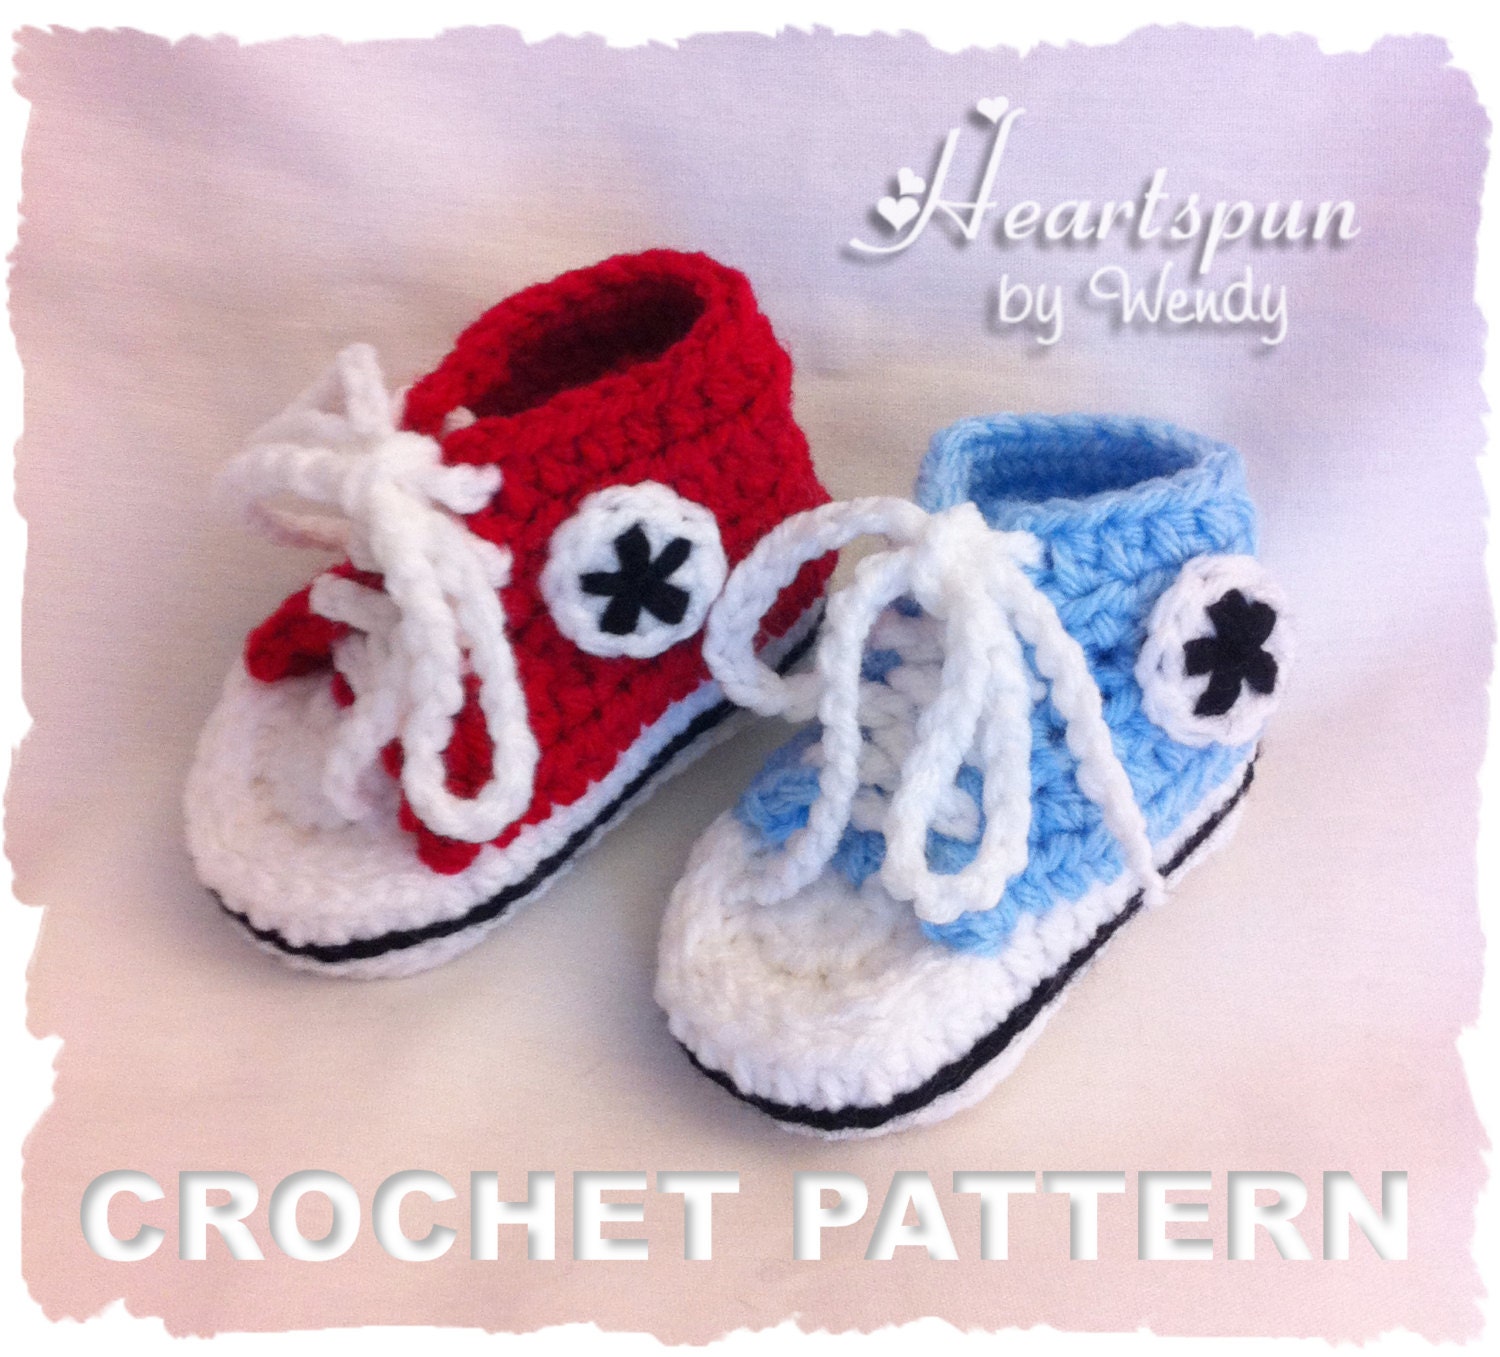 custom 4 Request for made you. order a size something have and crochet slippers just baby for